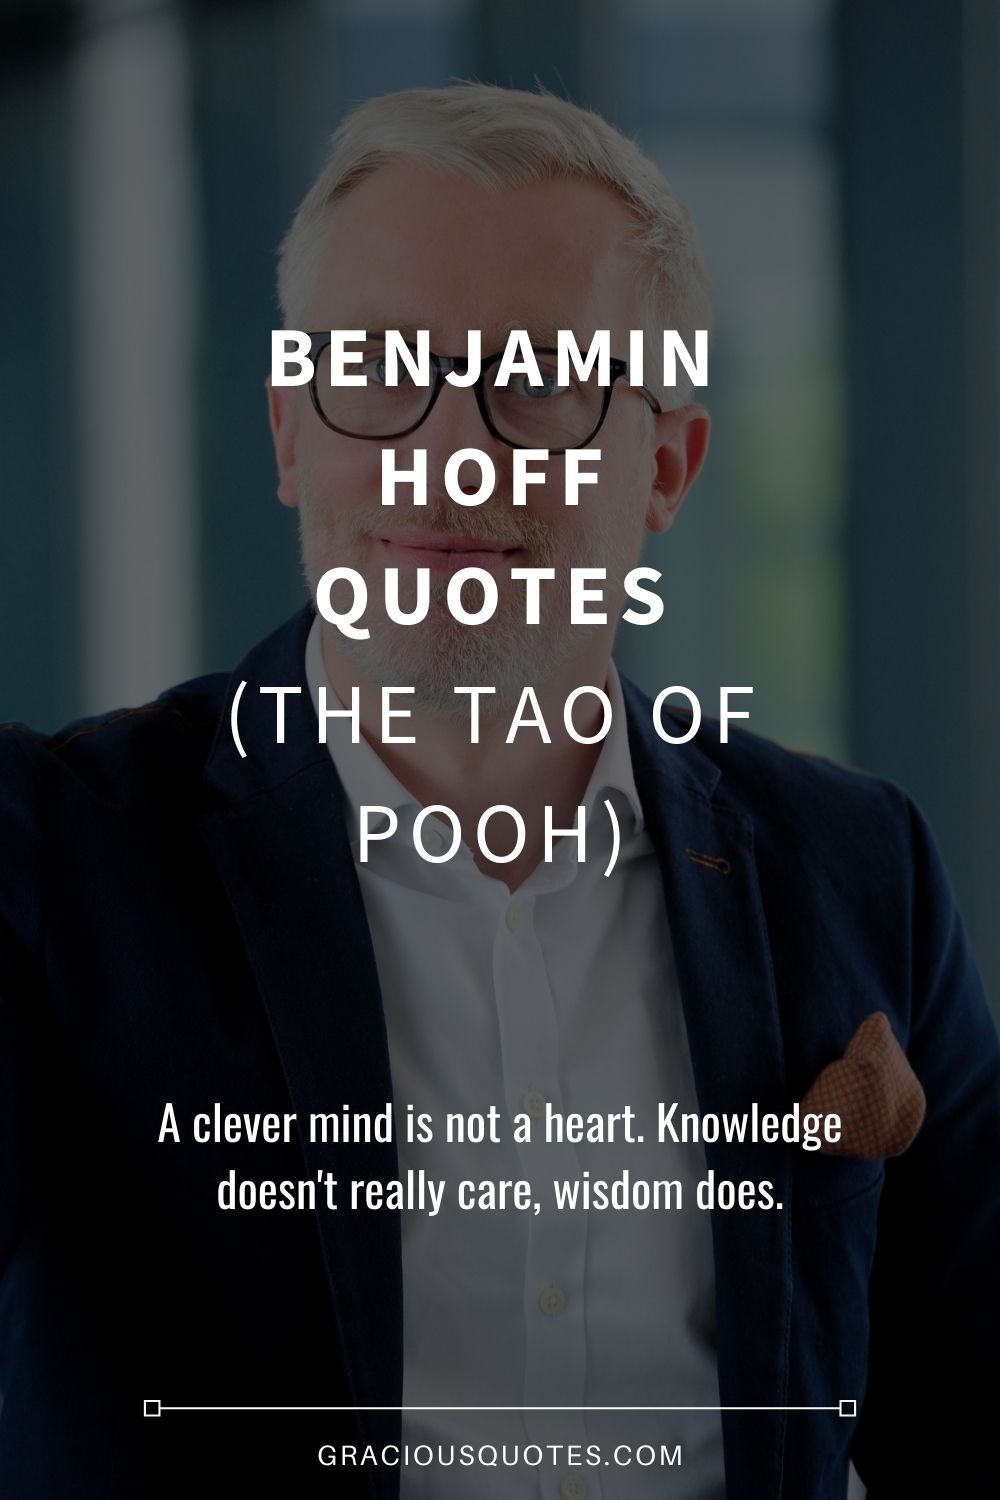 Benjamin Hoff Quotes (THE TAO OF POOH) - Gracious Quotes